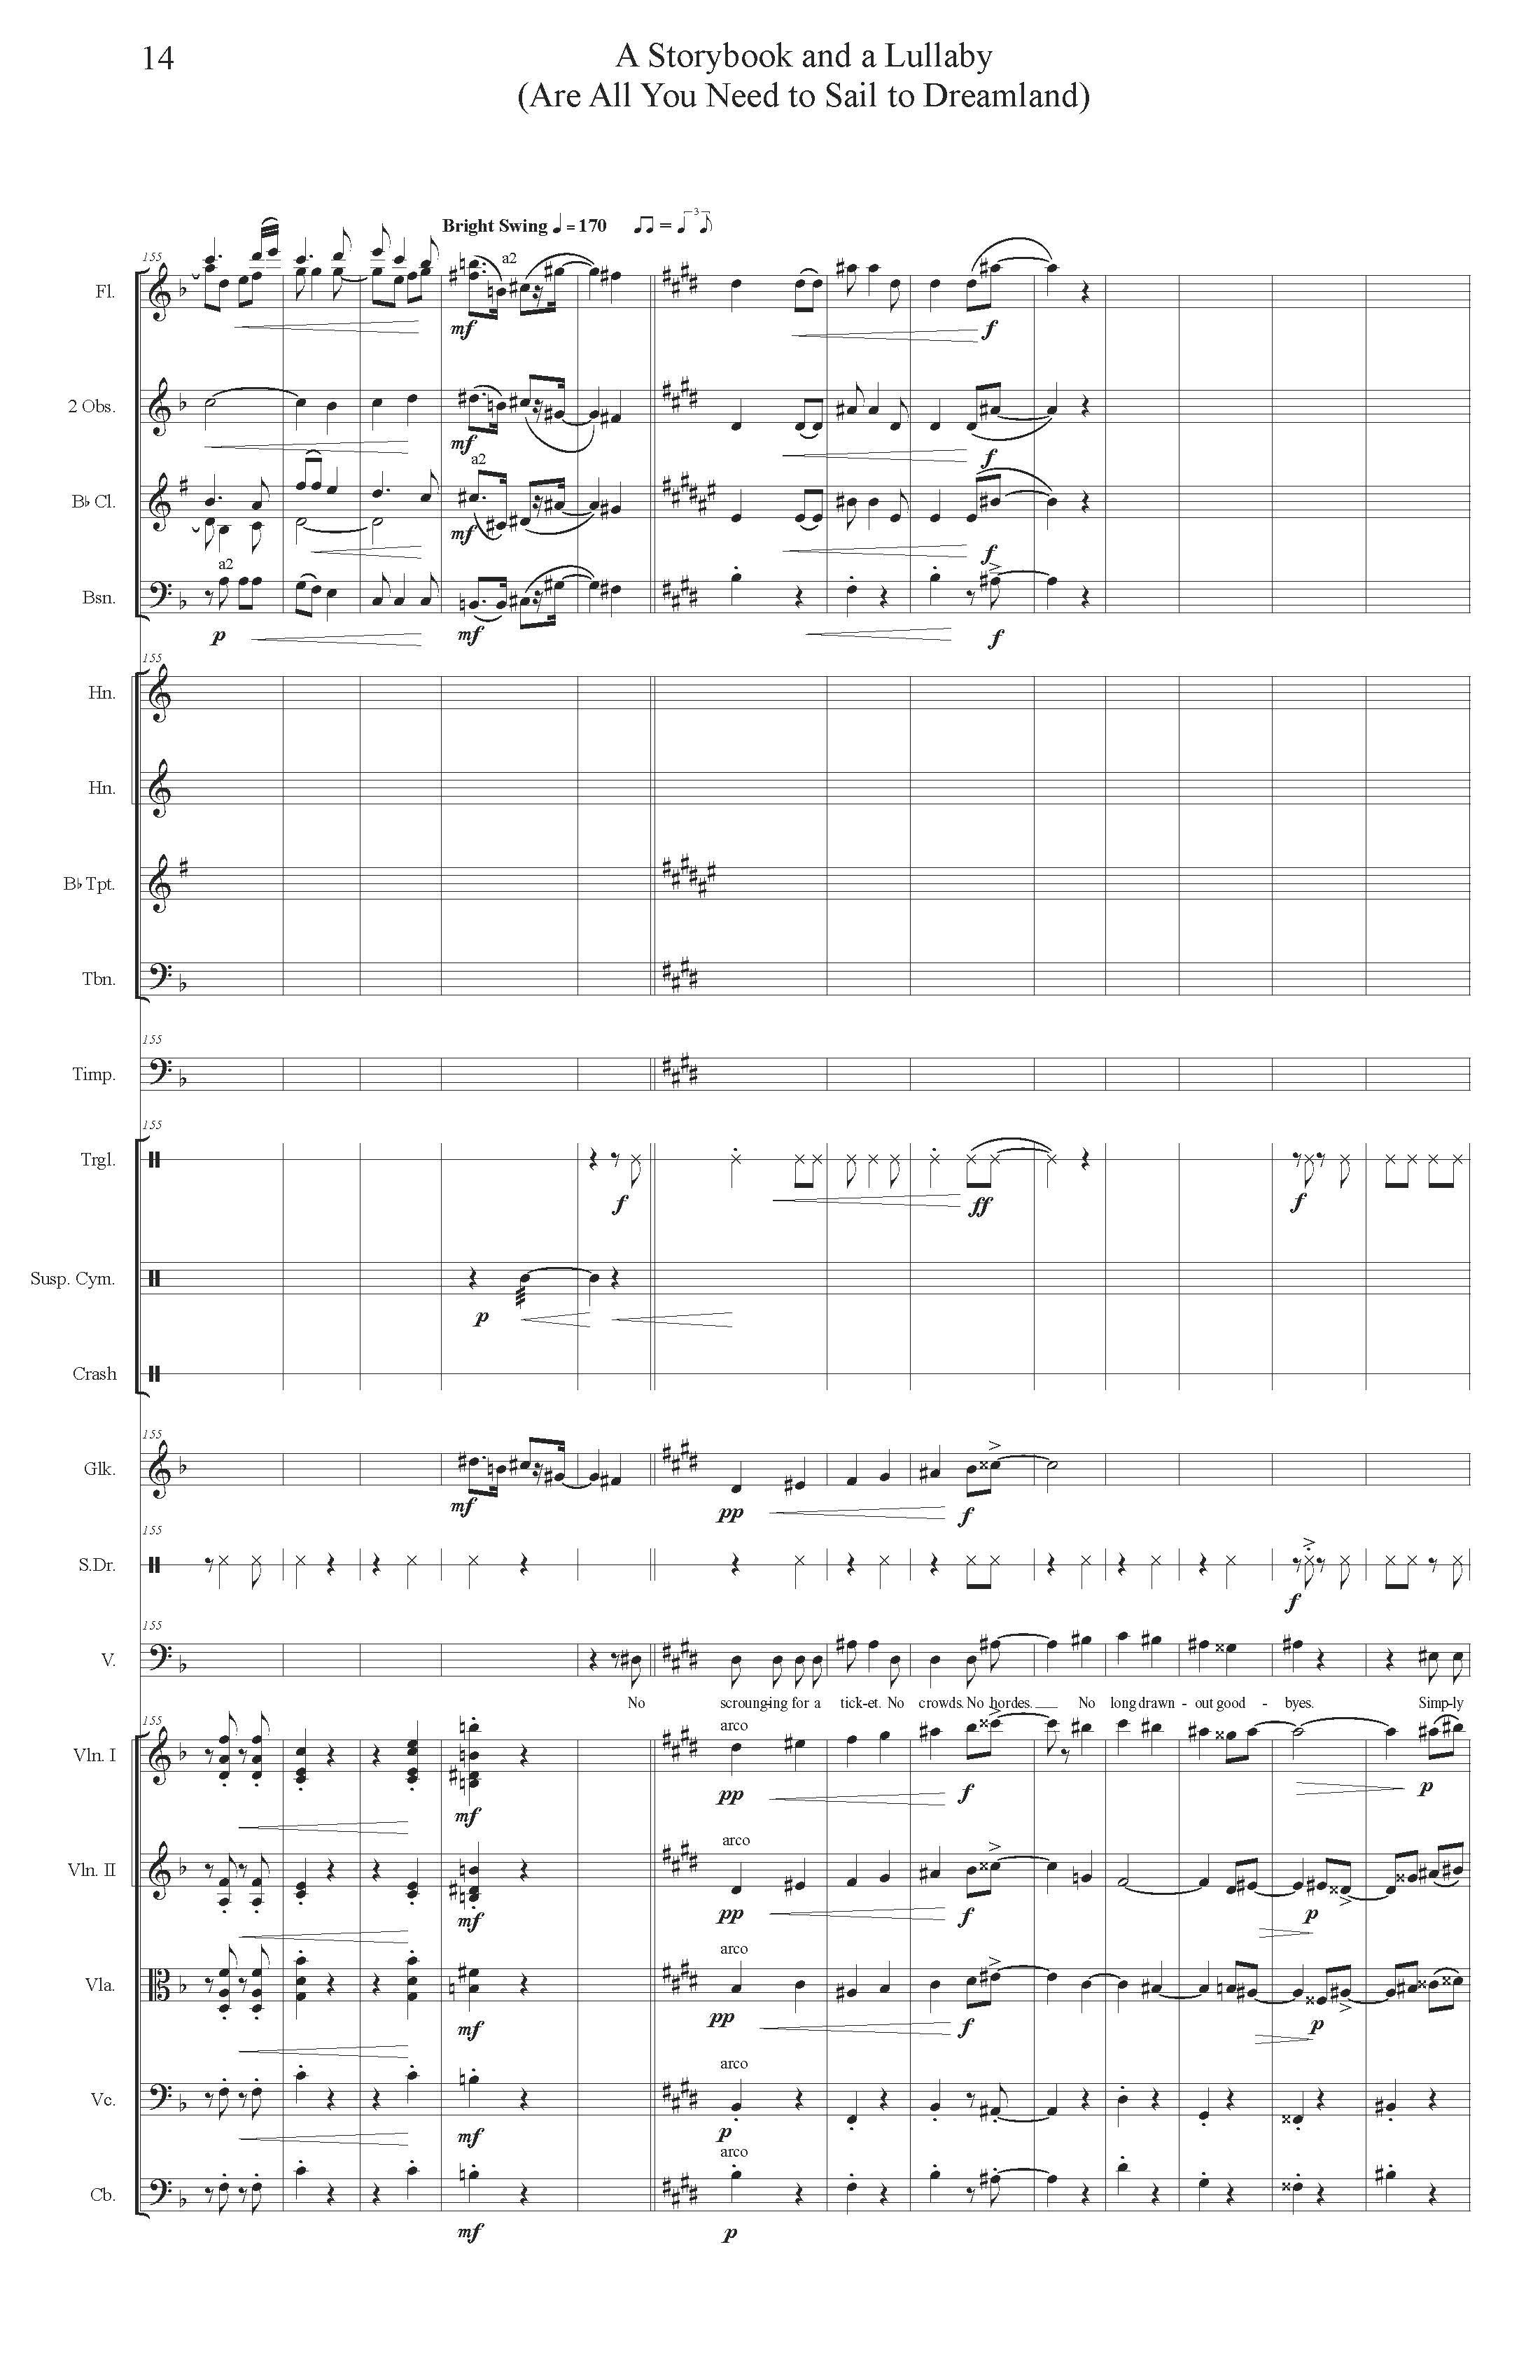 A STORYBOOK AND A LULLABY ORCH - Score_Page_14.jpg